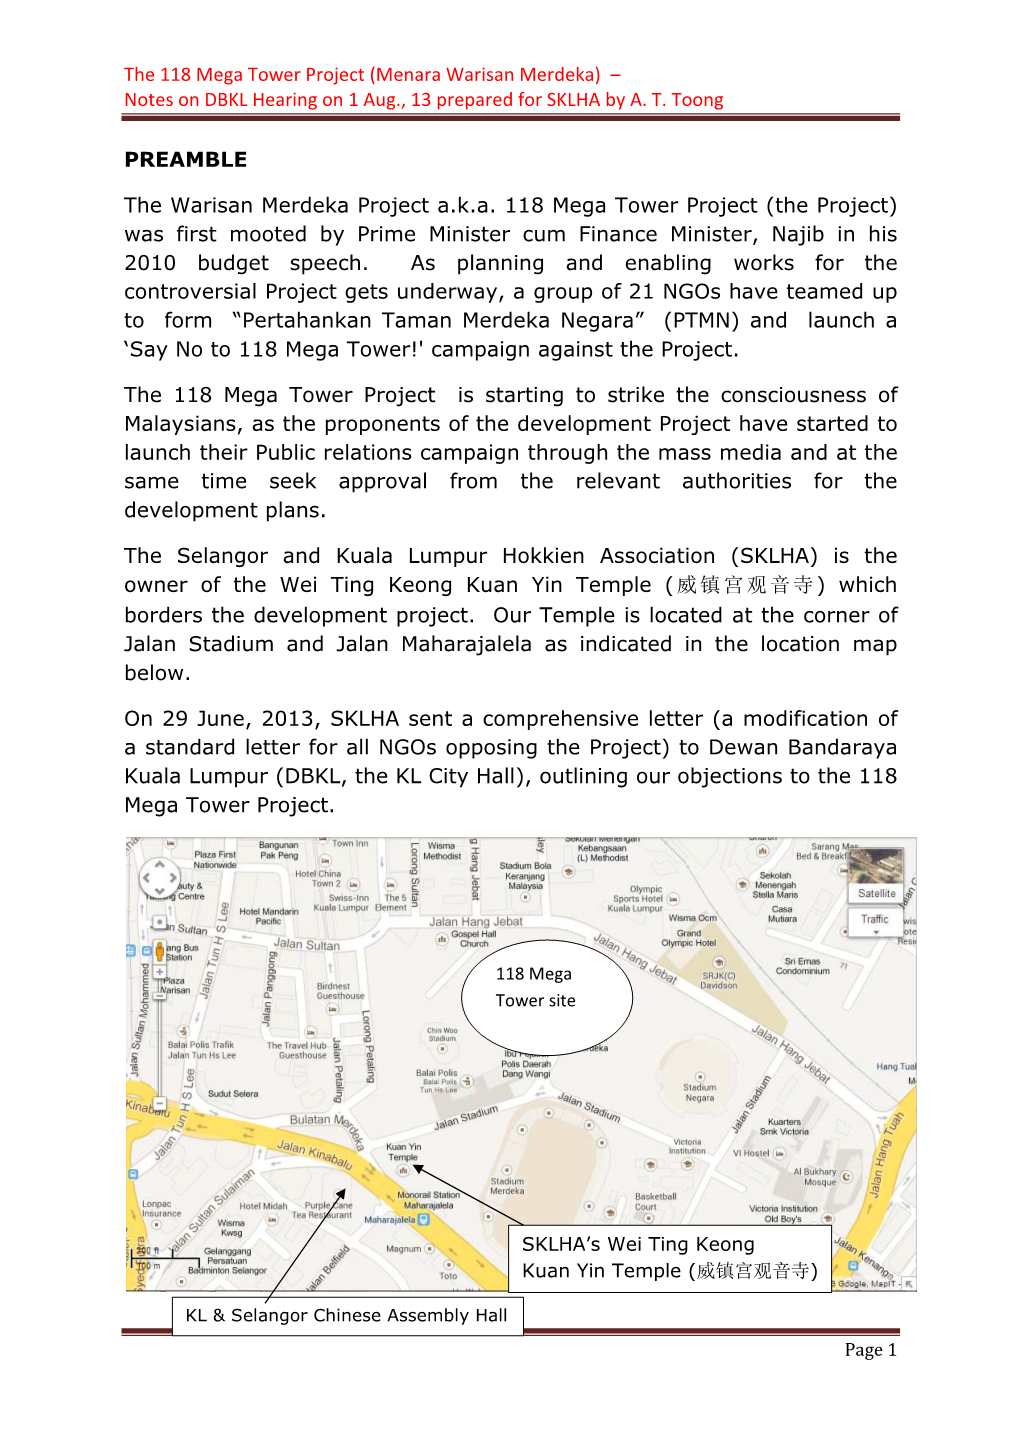 The 118 Mega Tower Project (Menara Warisan Merdeka) – Notes on DBKL Hearing on 1 Aug., 13 Prepared for SKLHA by A